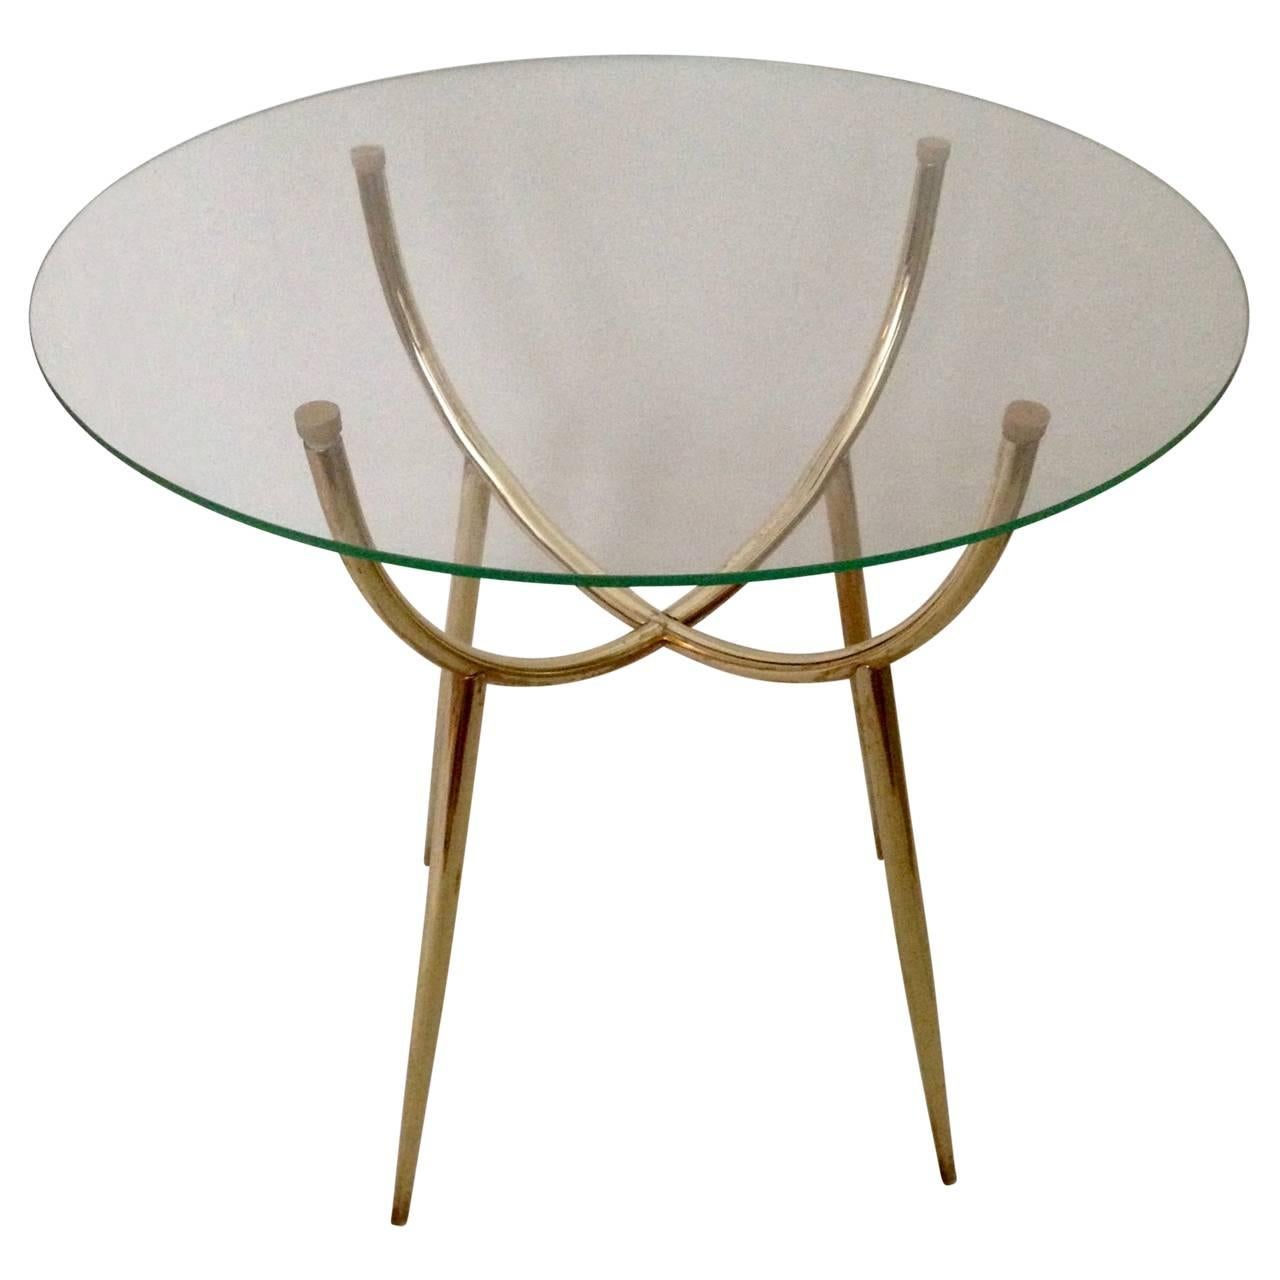 Very charming small brass and glass table in Gio Ponti style.